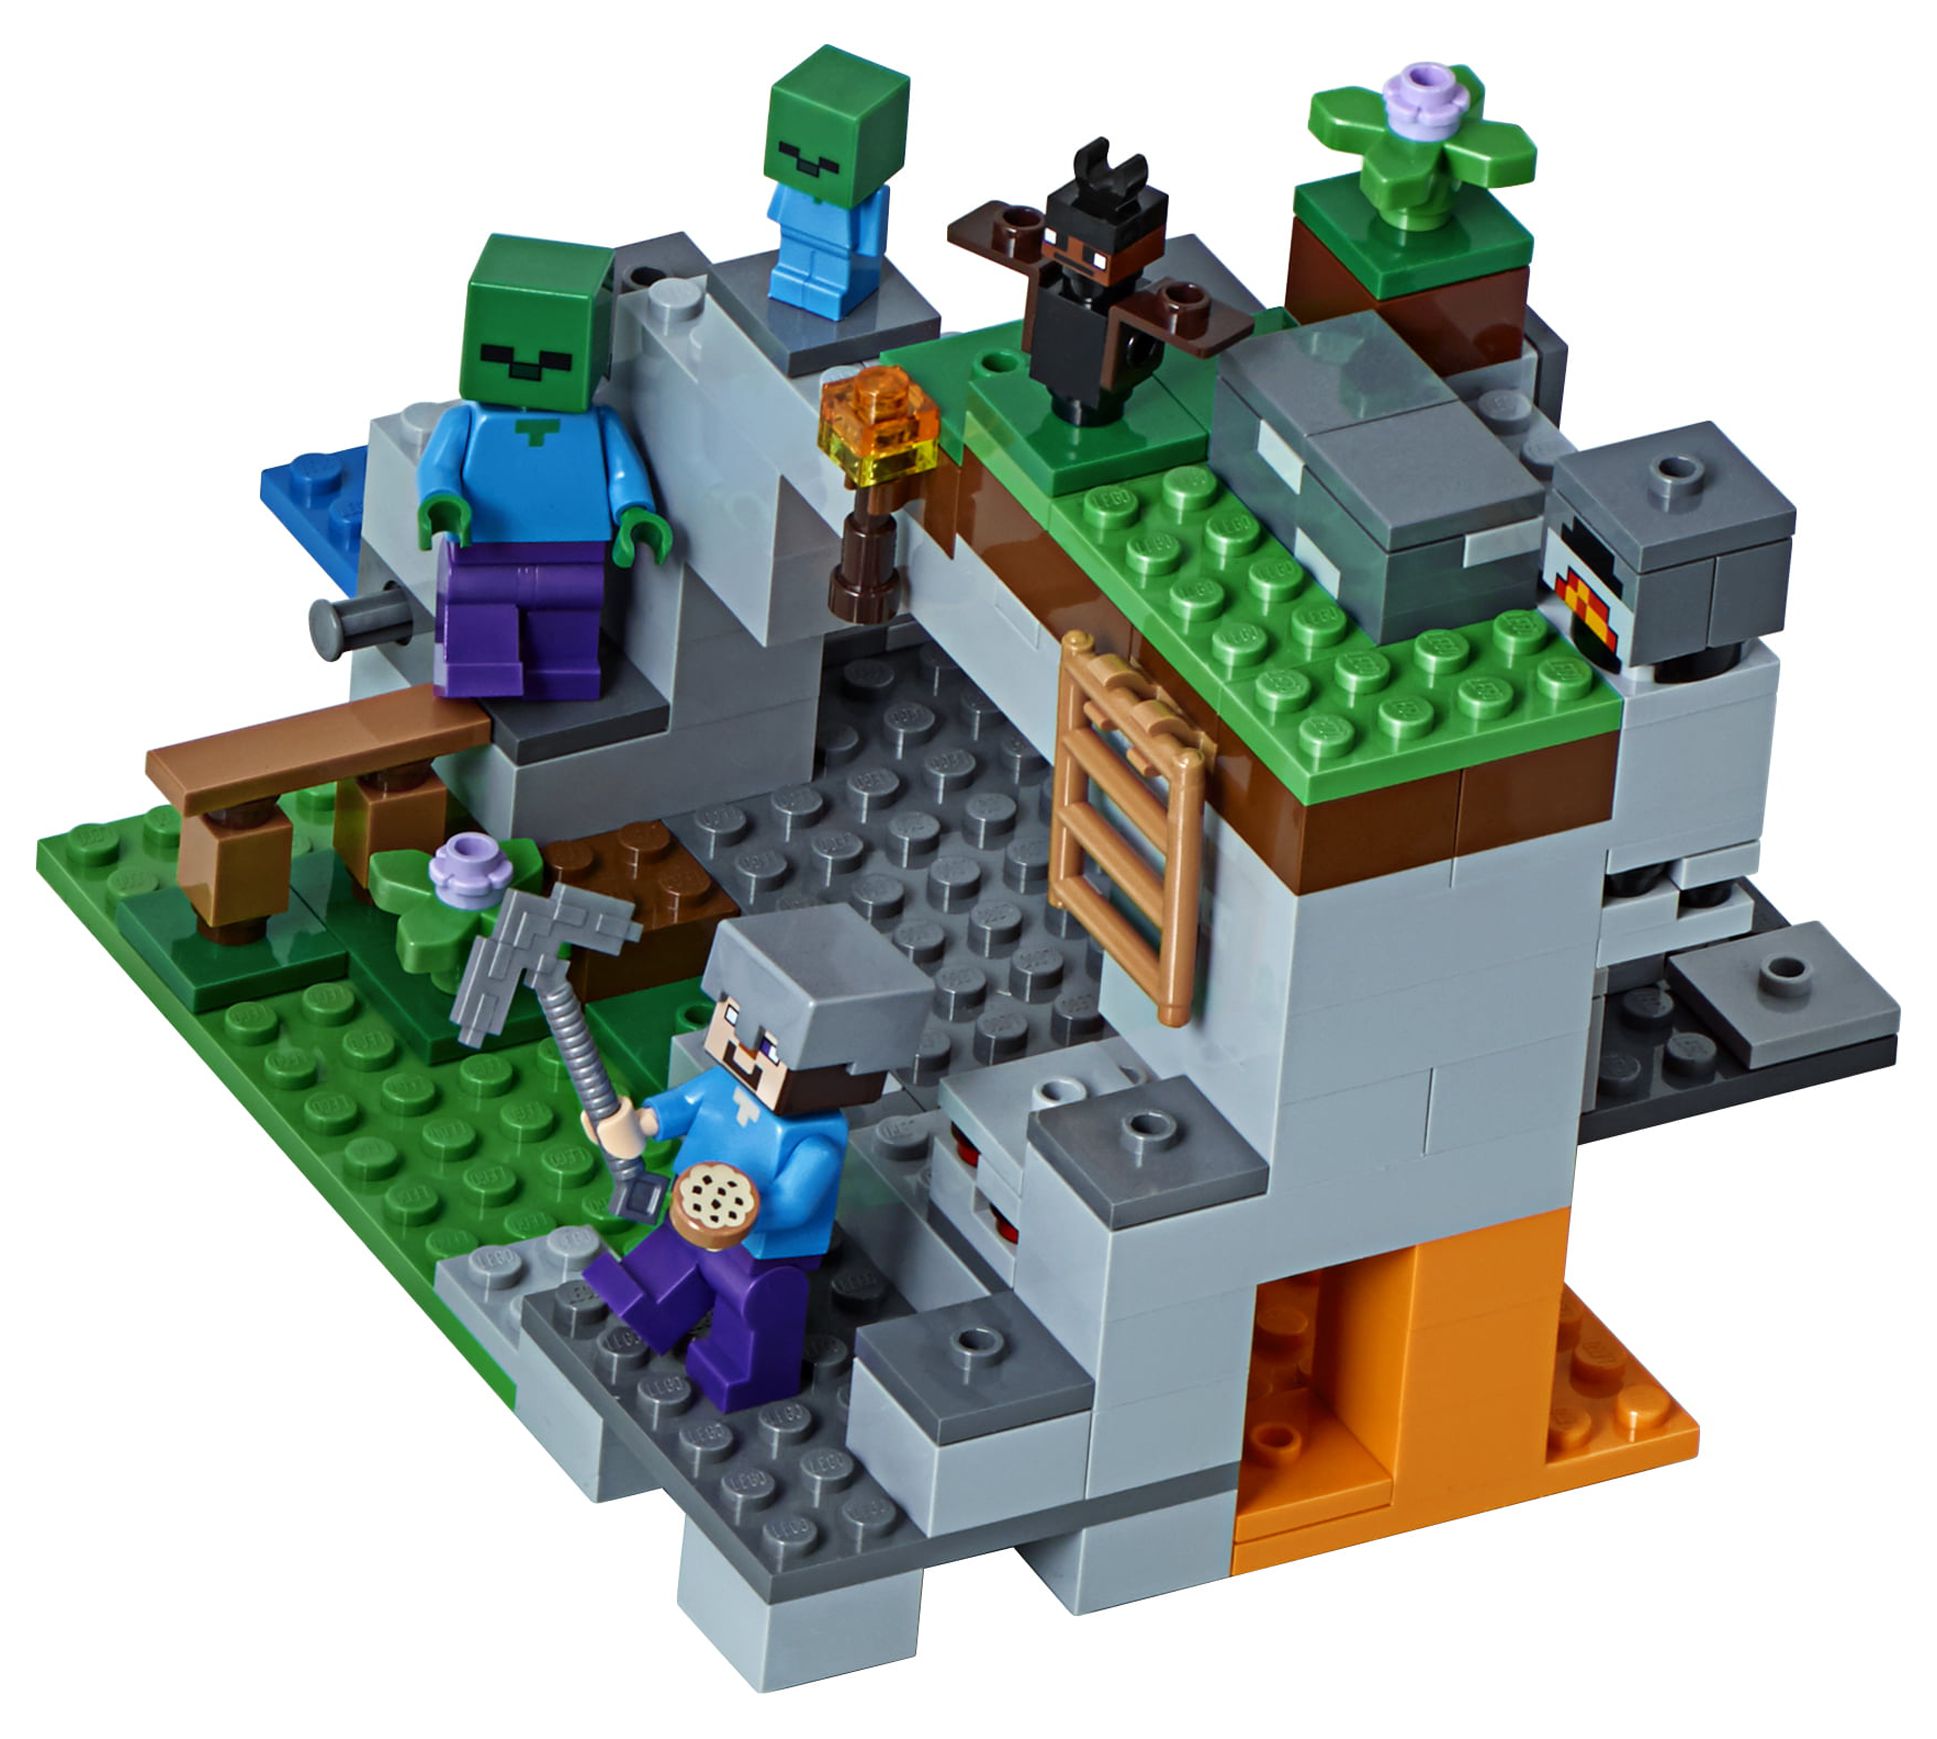 LEGO Minecraft The Zombie Cave 21141 Building Kit for Creative Play - image 2 of 7